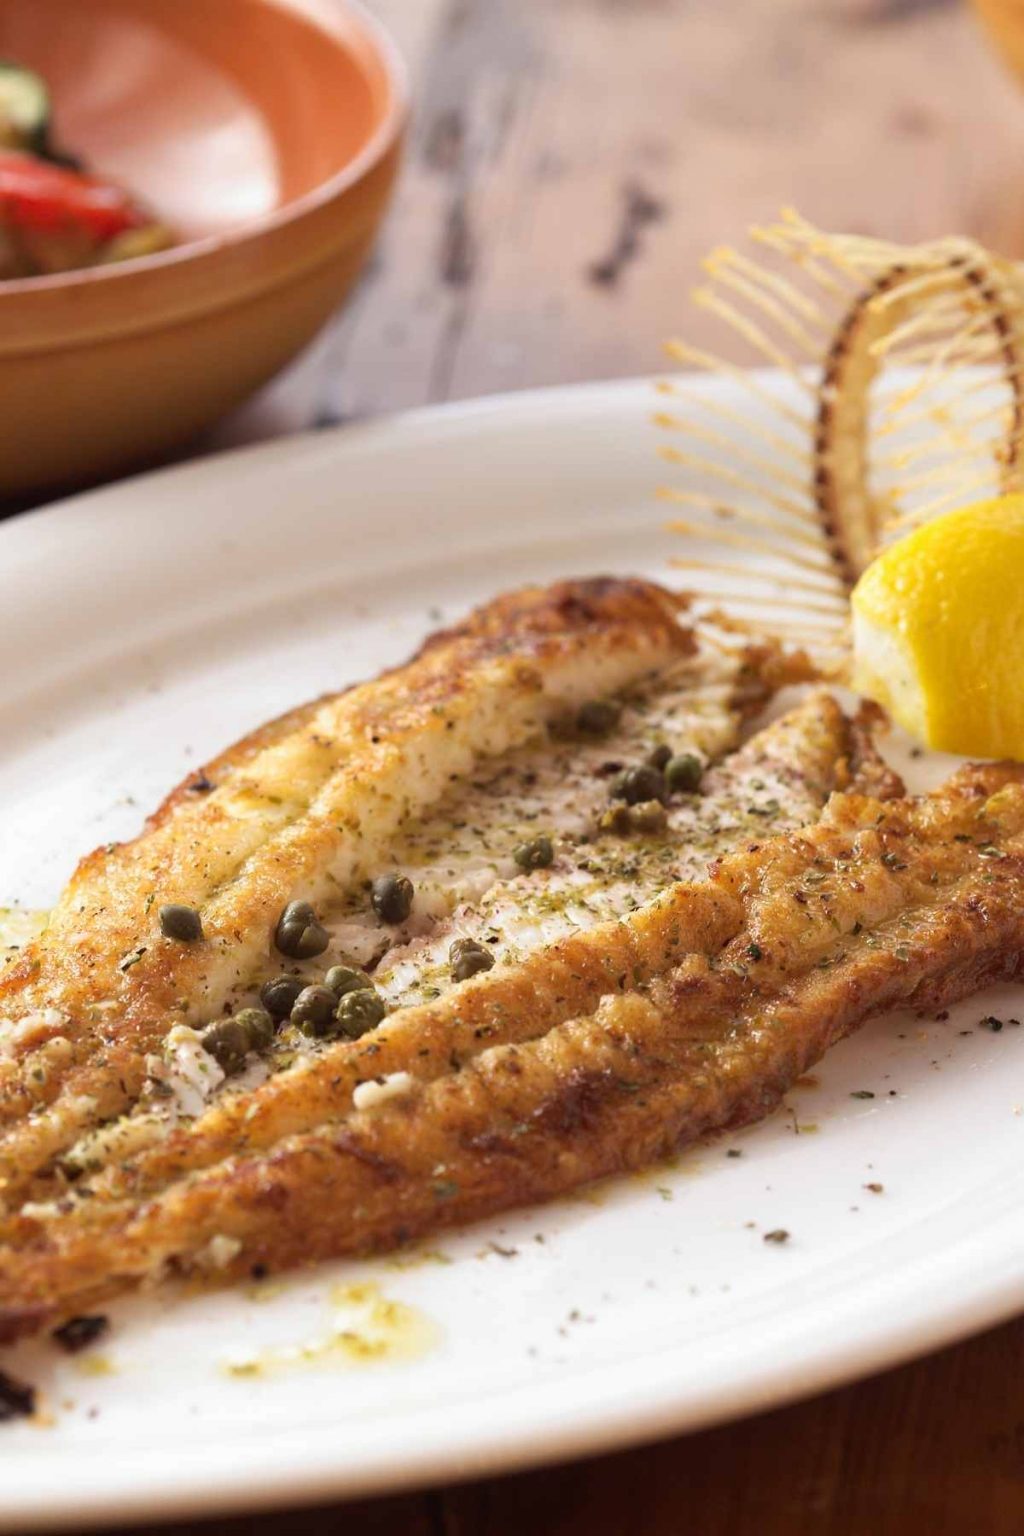 Baked Dover Sole Fish with Lemon Garlic Butter